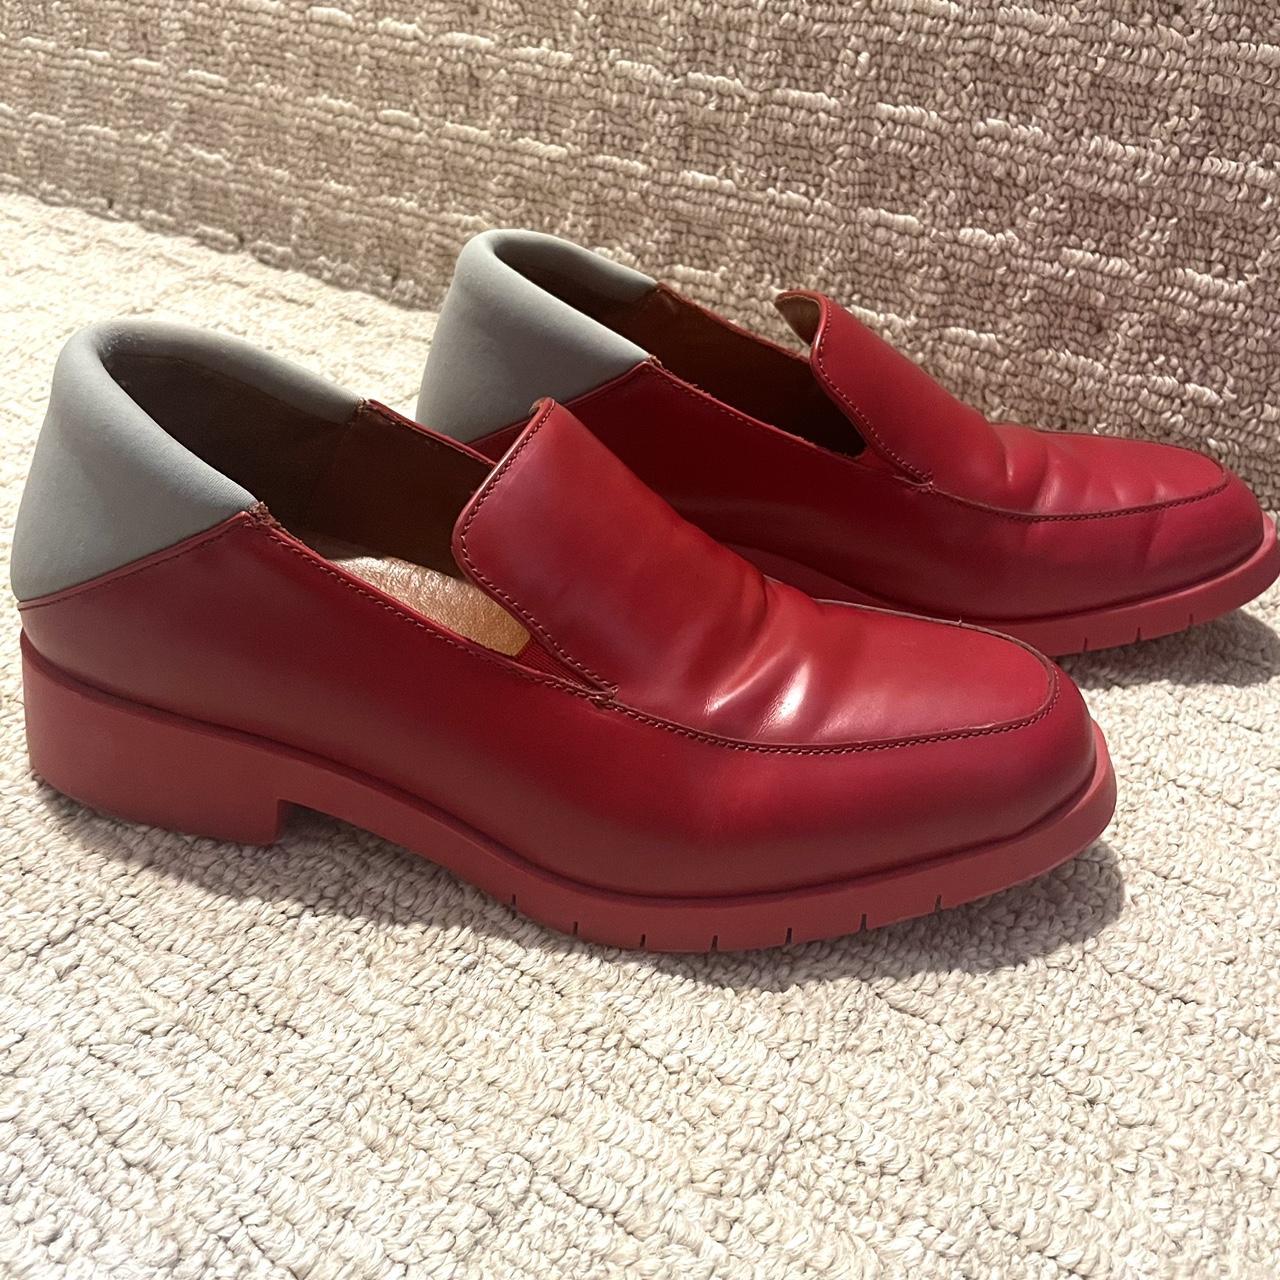 Women's Red and Grey Loafers | Depop